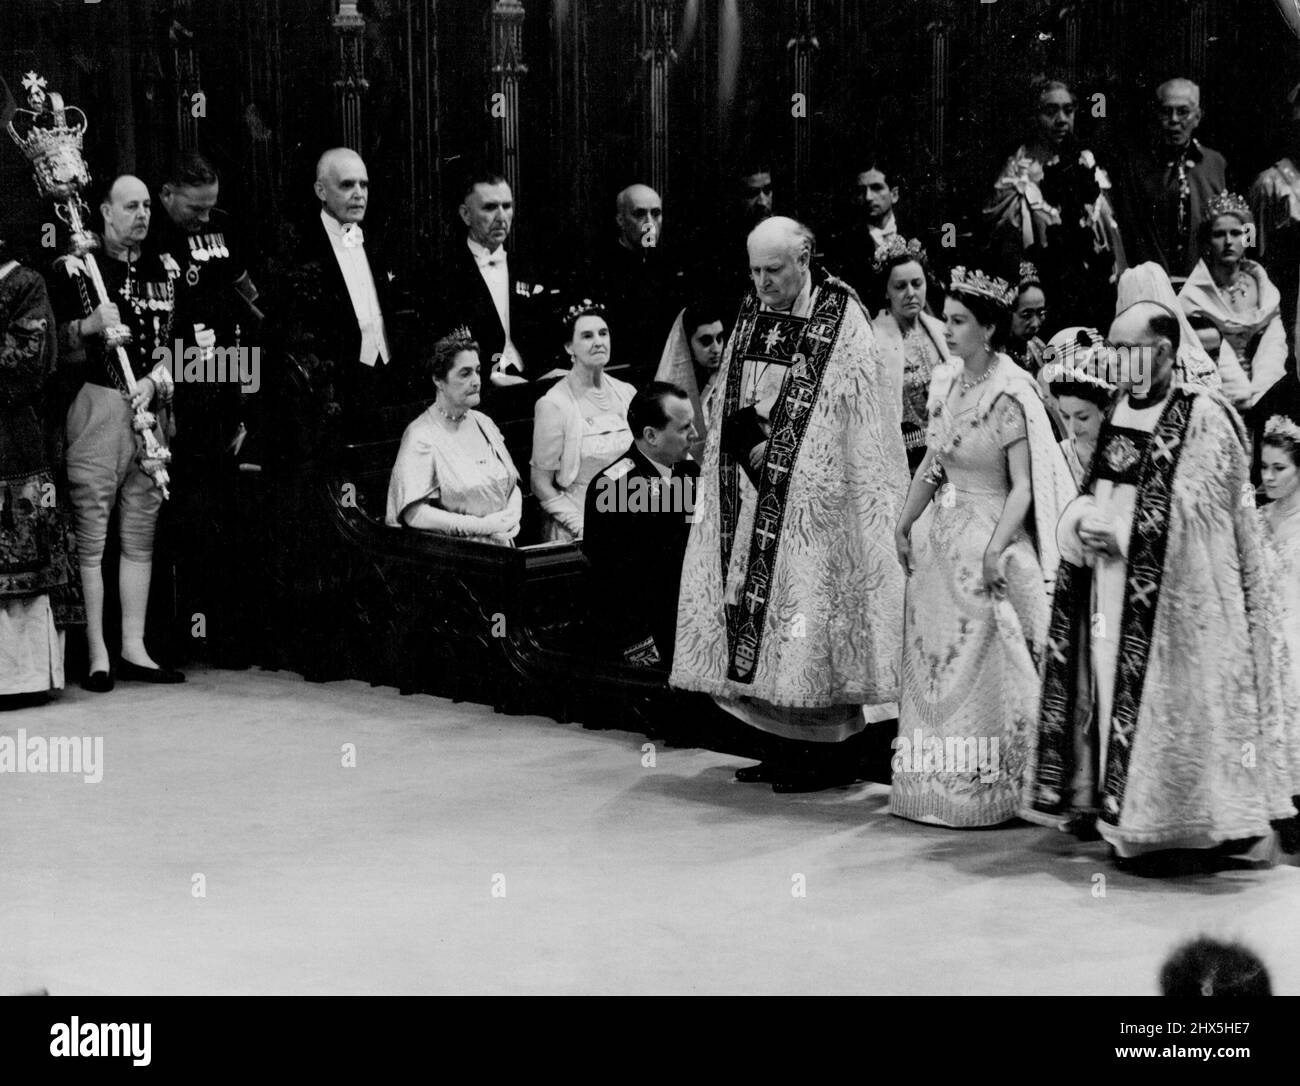 Coronation: The Queen In The Abbey The Queen during her progress through Westminster Abbey after her arrival for the Coronation ceremony to-day (Tuesday). On either side of the Queen are the Bishop of Durham, the Rt. Rev. Arthur Michael Ramsay (left) and the Bishop of Bath and Wells, the Rt. Rev. Harold William Bradfield. The Queen is wearing her Royal robe of crimson velvet, trimmed with ***** and bordered with gold lace. On her head, she has a diadem of precious stones. The Queen is also wearing the collar of the Garter. June 2, 1953. (Photo by Reuterphoto). Stock Photo